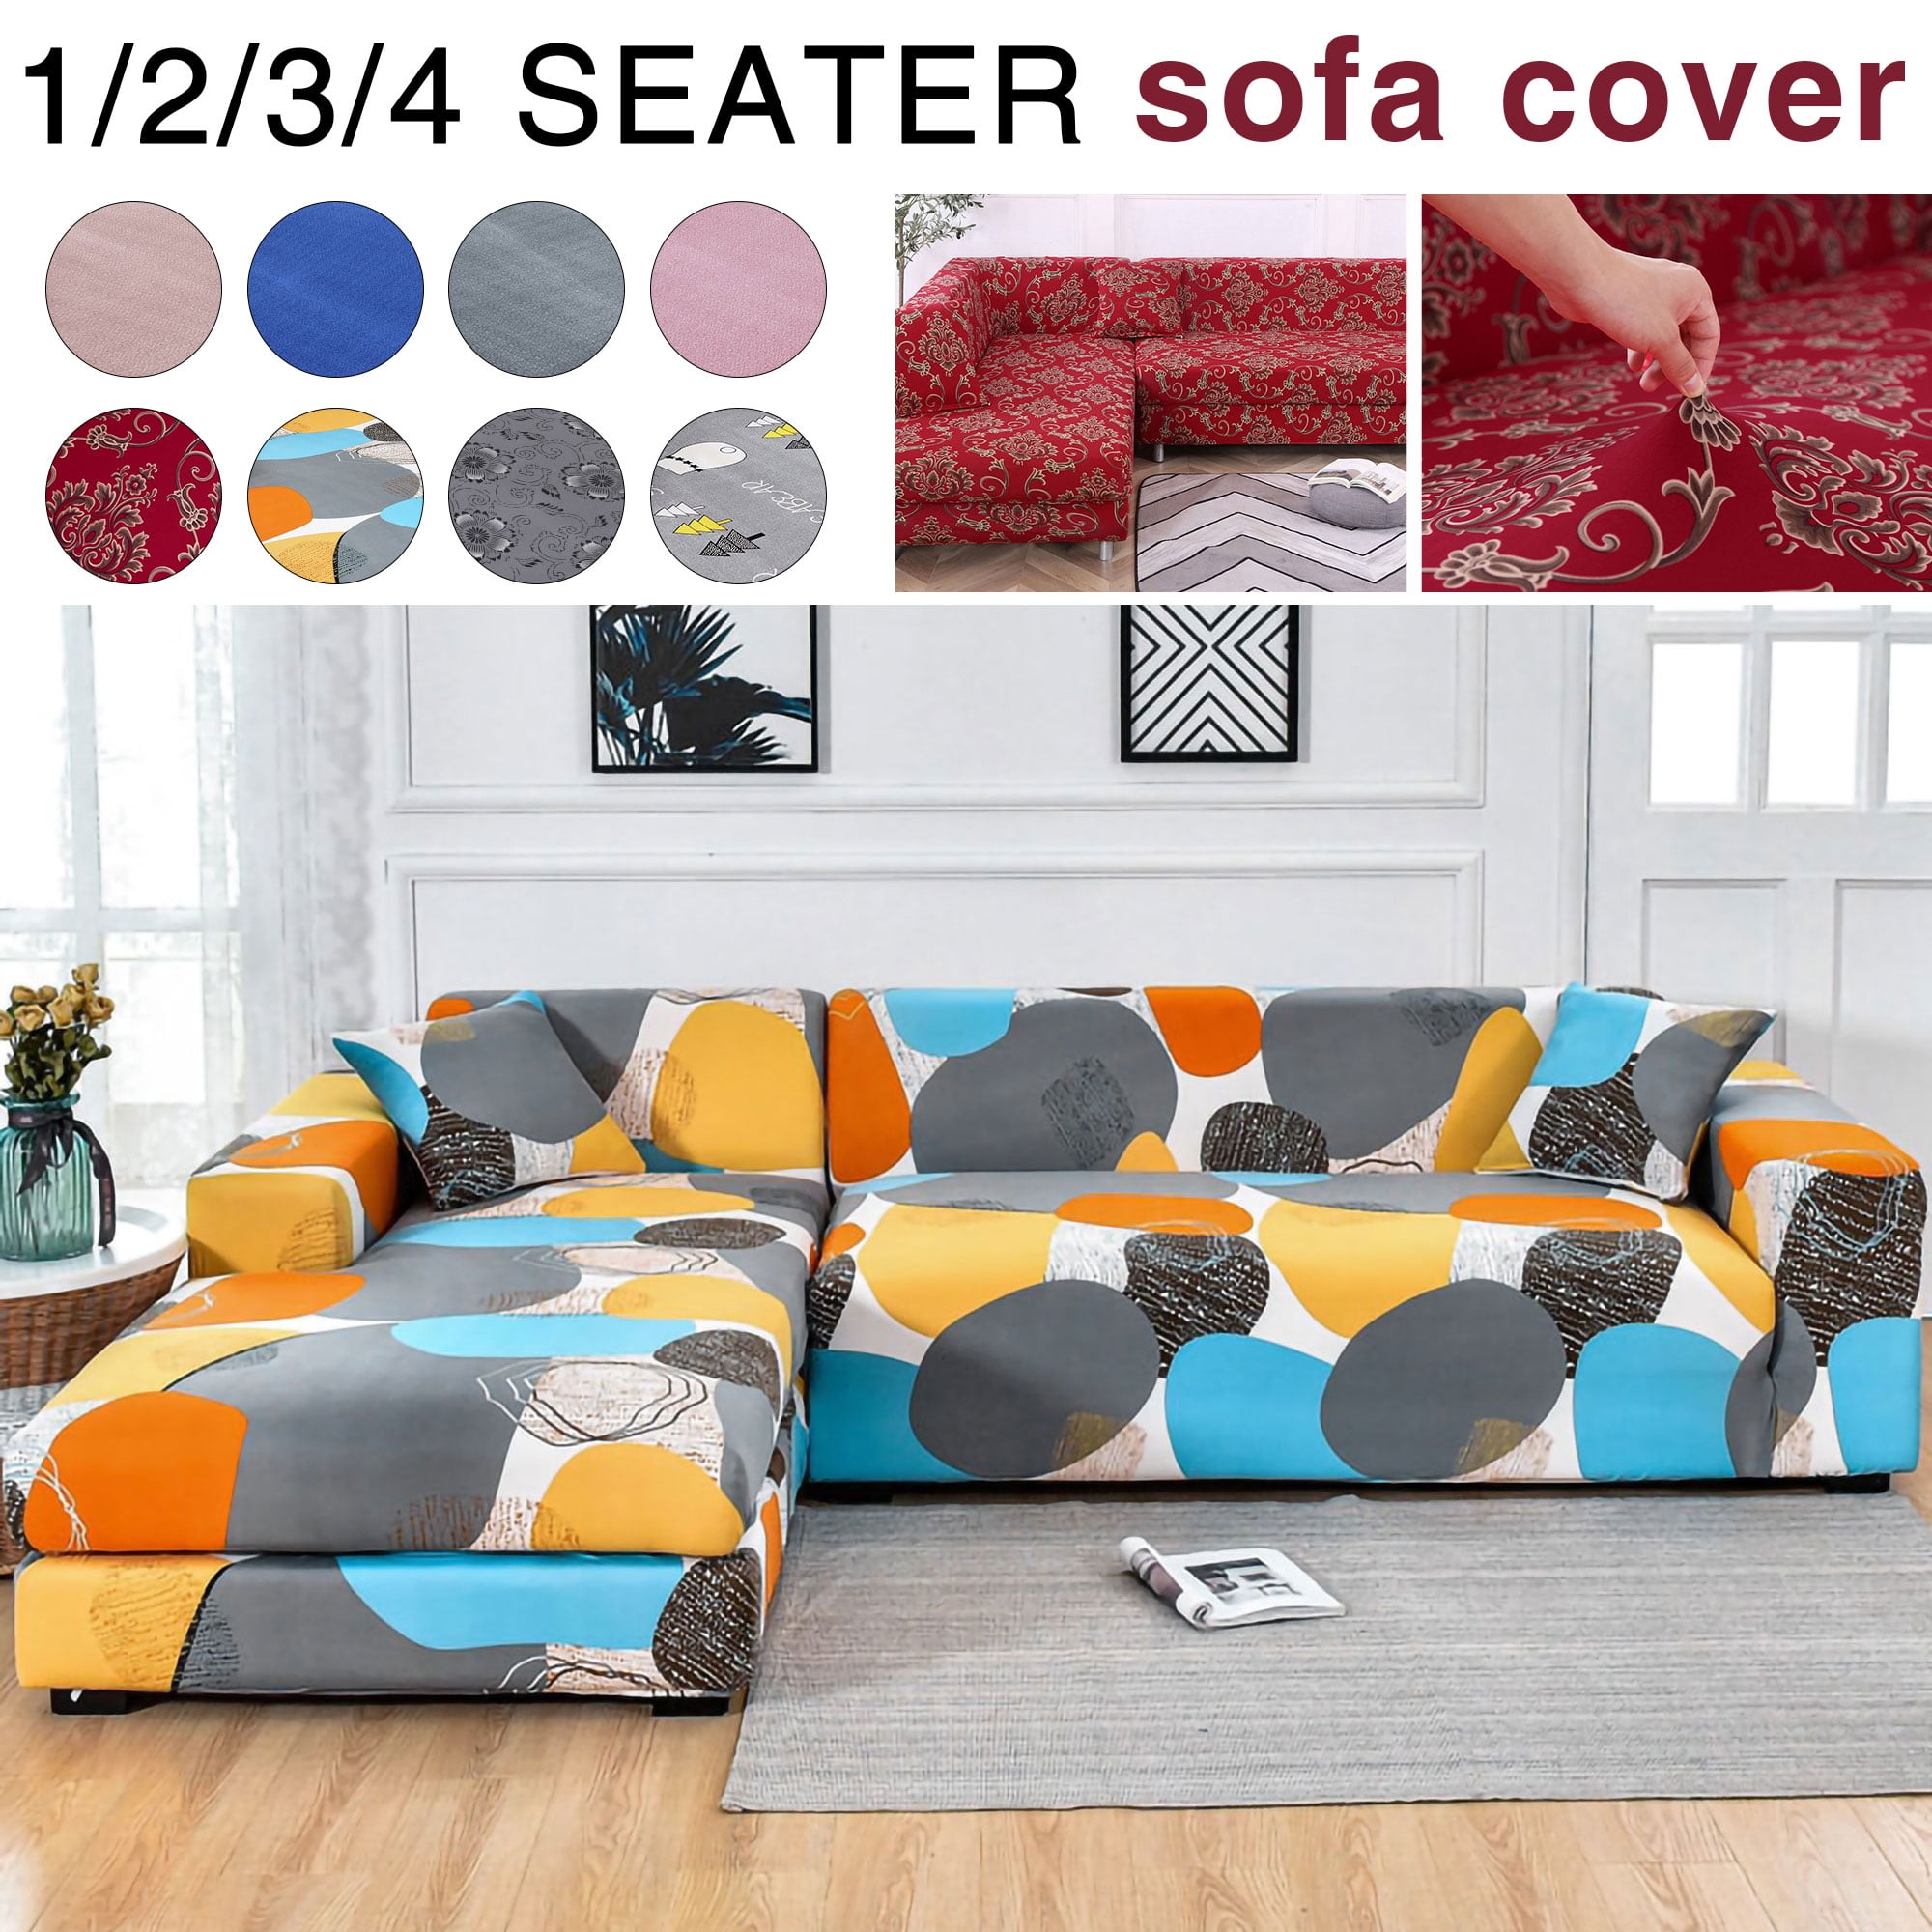 Details about   1 Seater Stretch Elastic Fabric Sofa Cover Breathable Slipcover w/ Pillowcase 